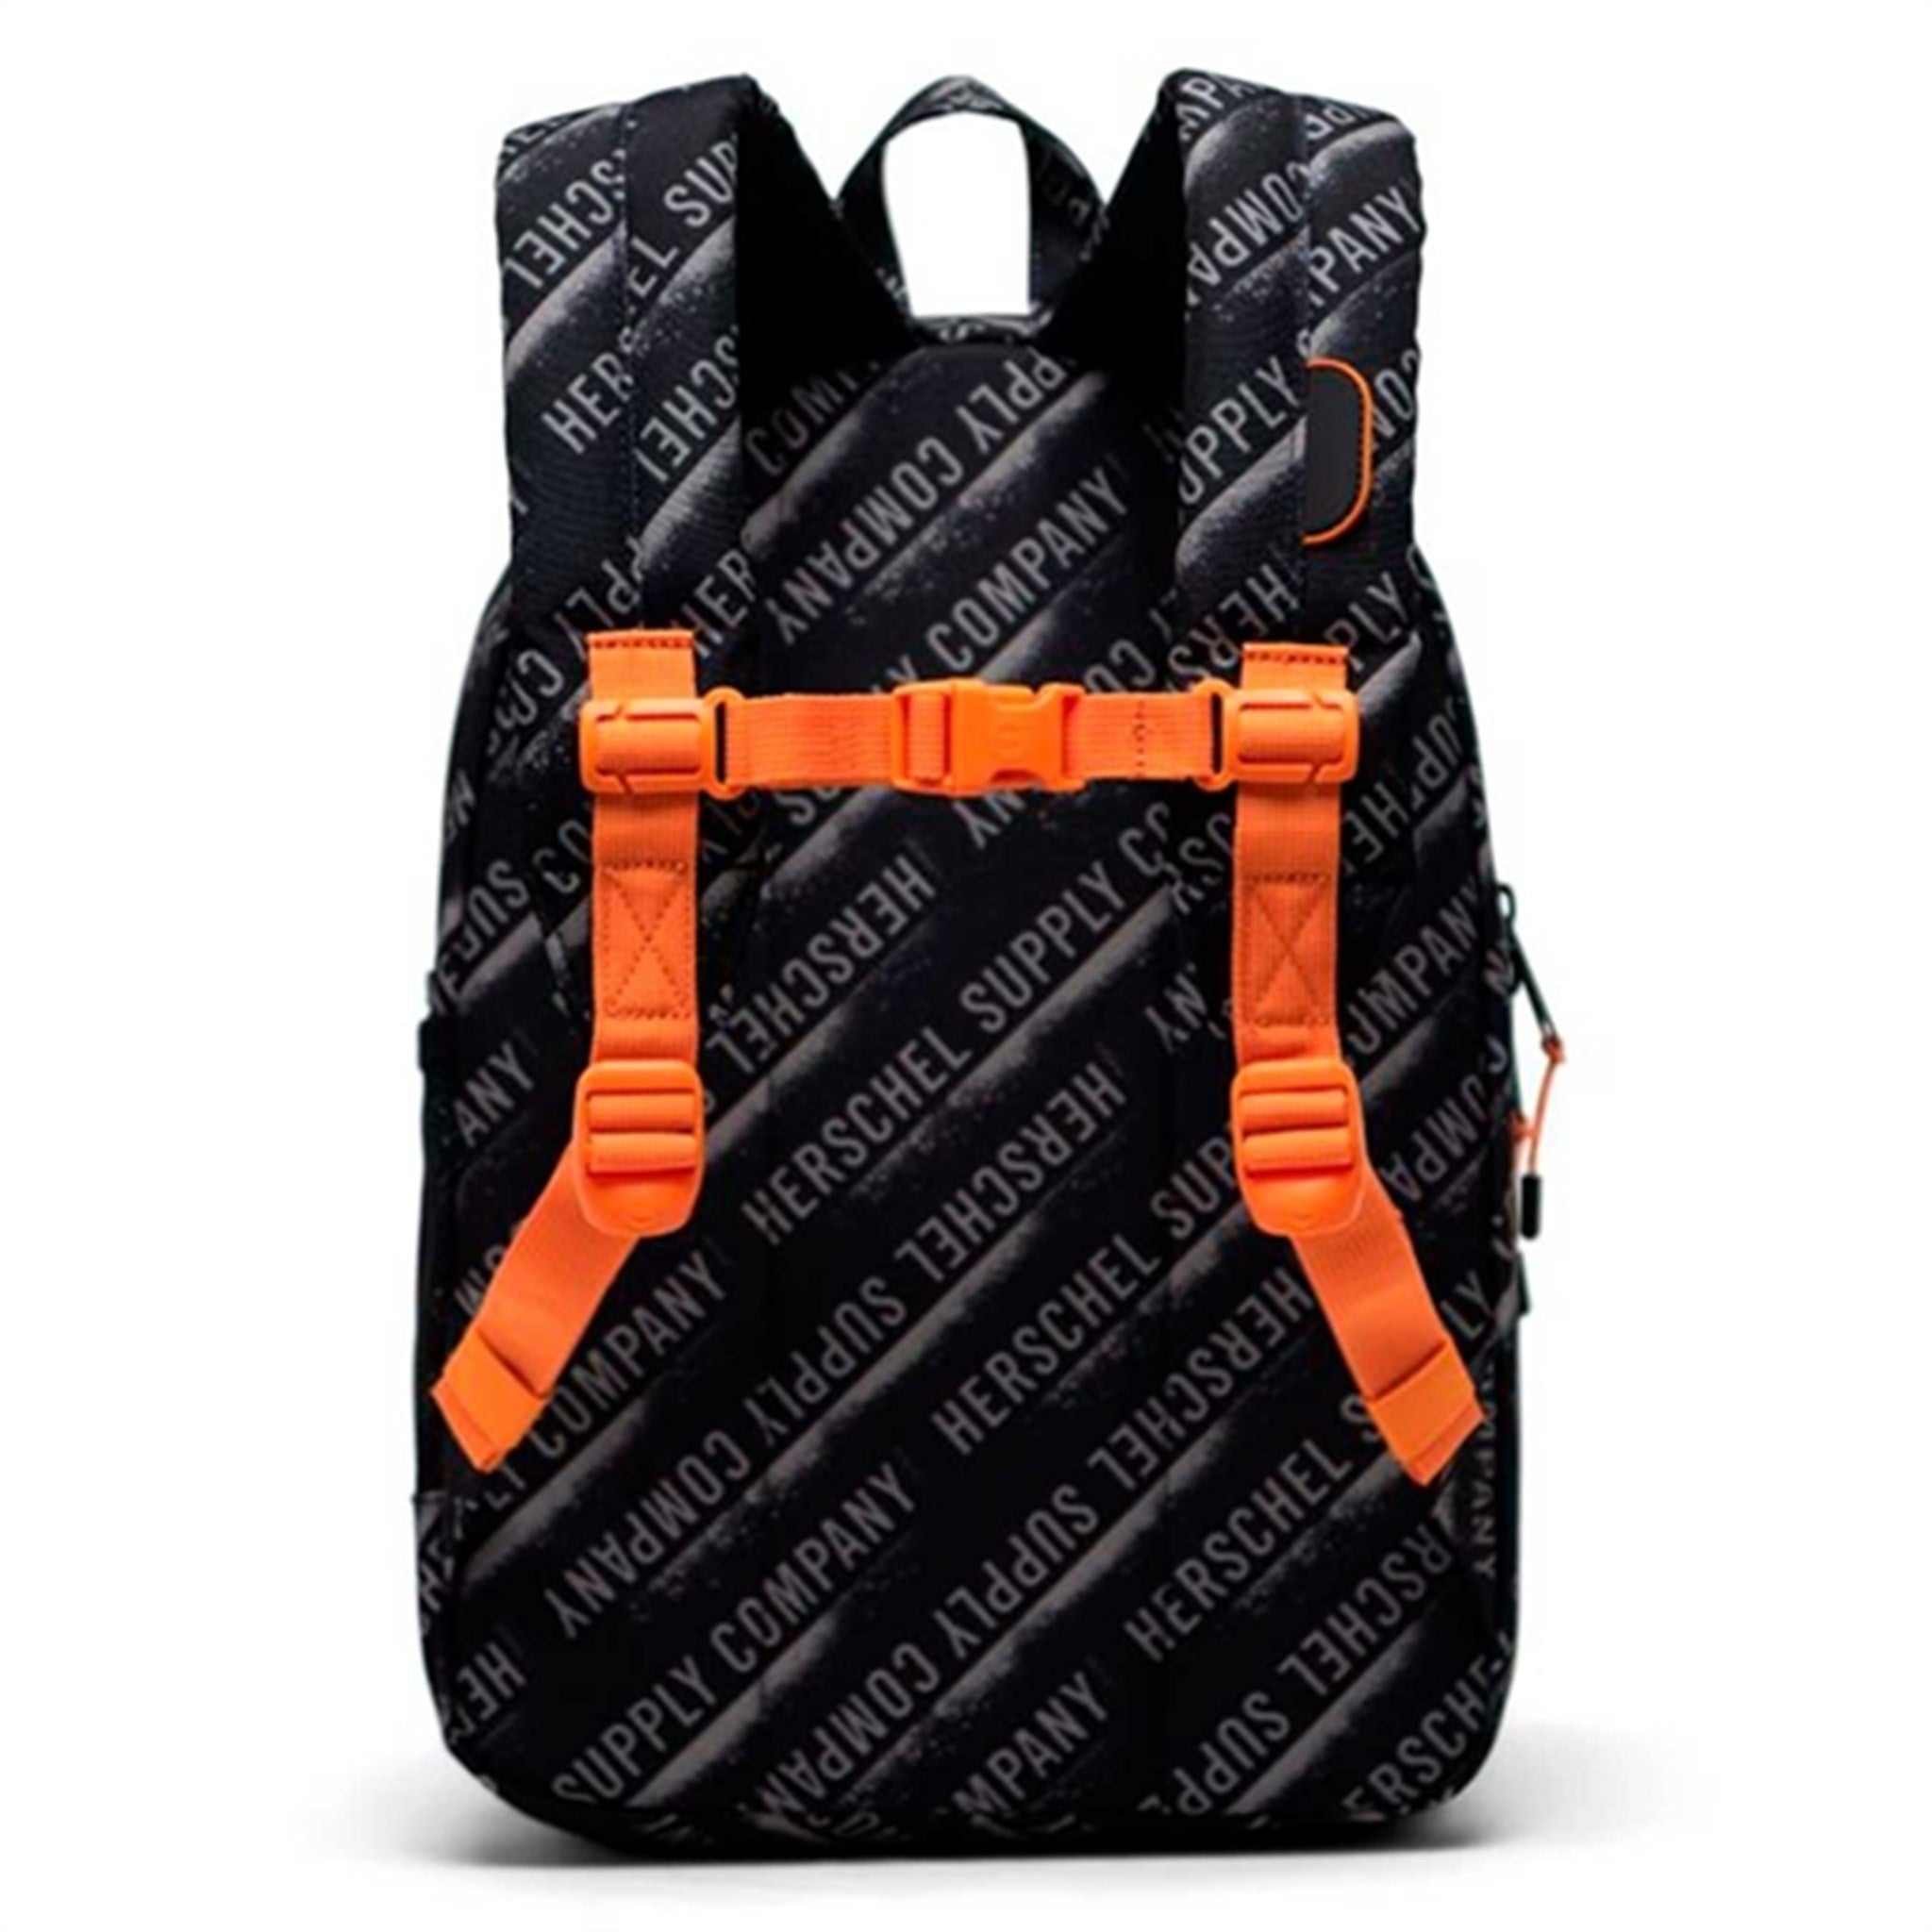 Herschel Backpack Youth Stencil Roll Call/Orange Popsicle 4